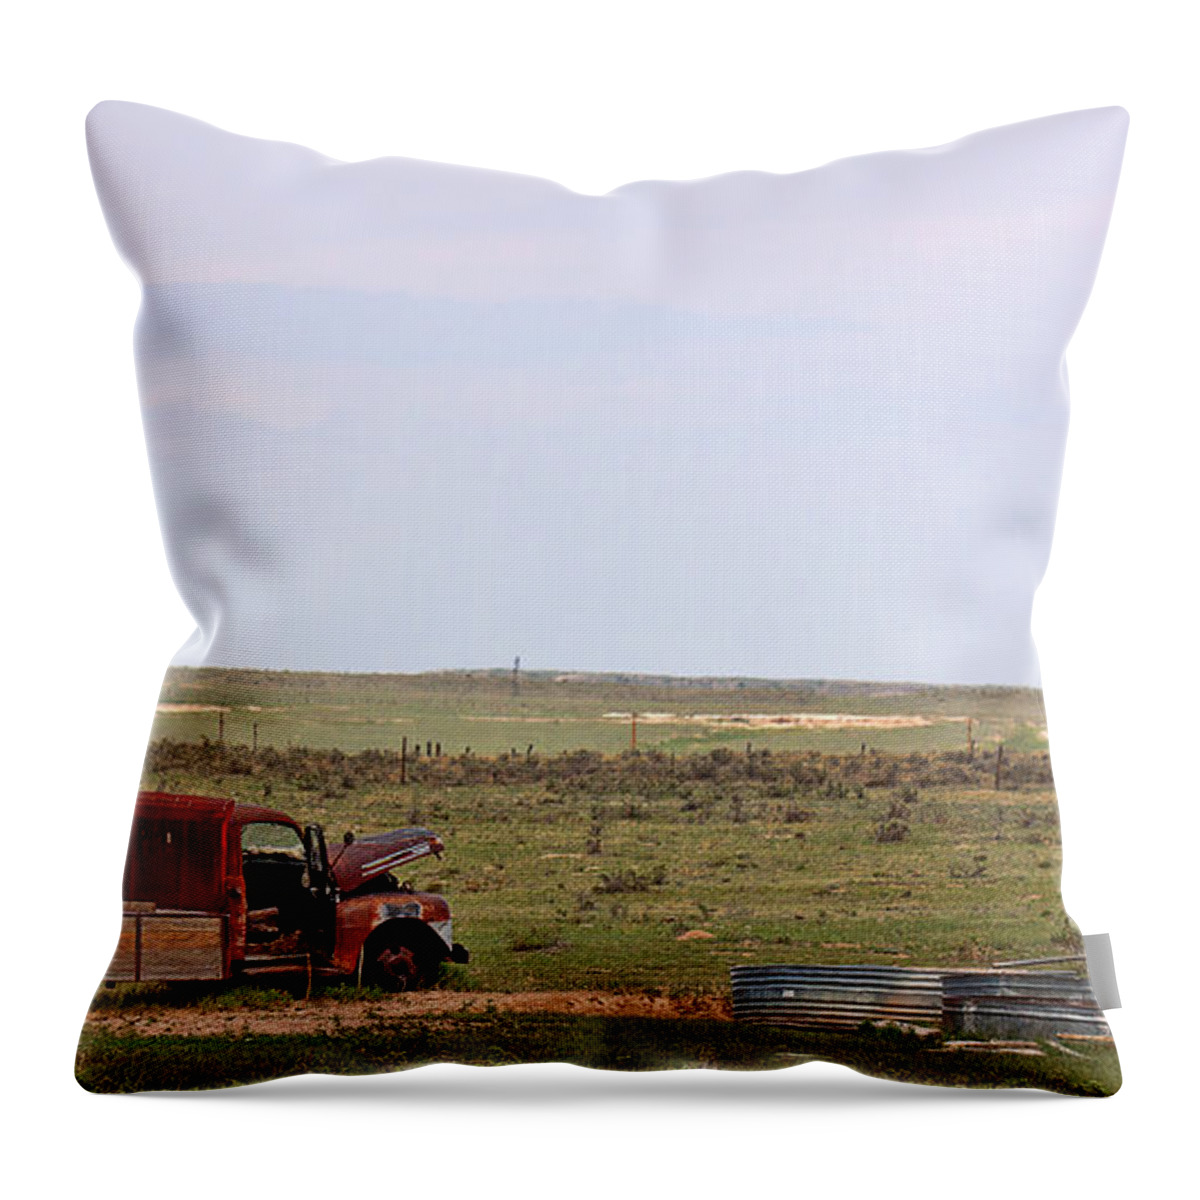 Colorado Plains Throw Pillow featuring the photograph Busted by Jim Garrison